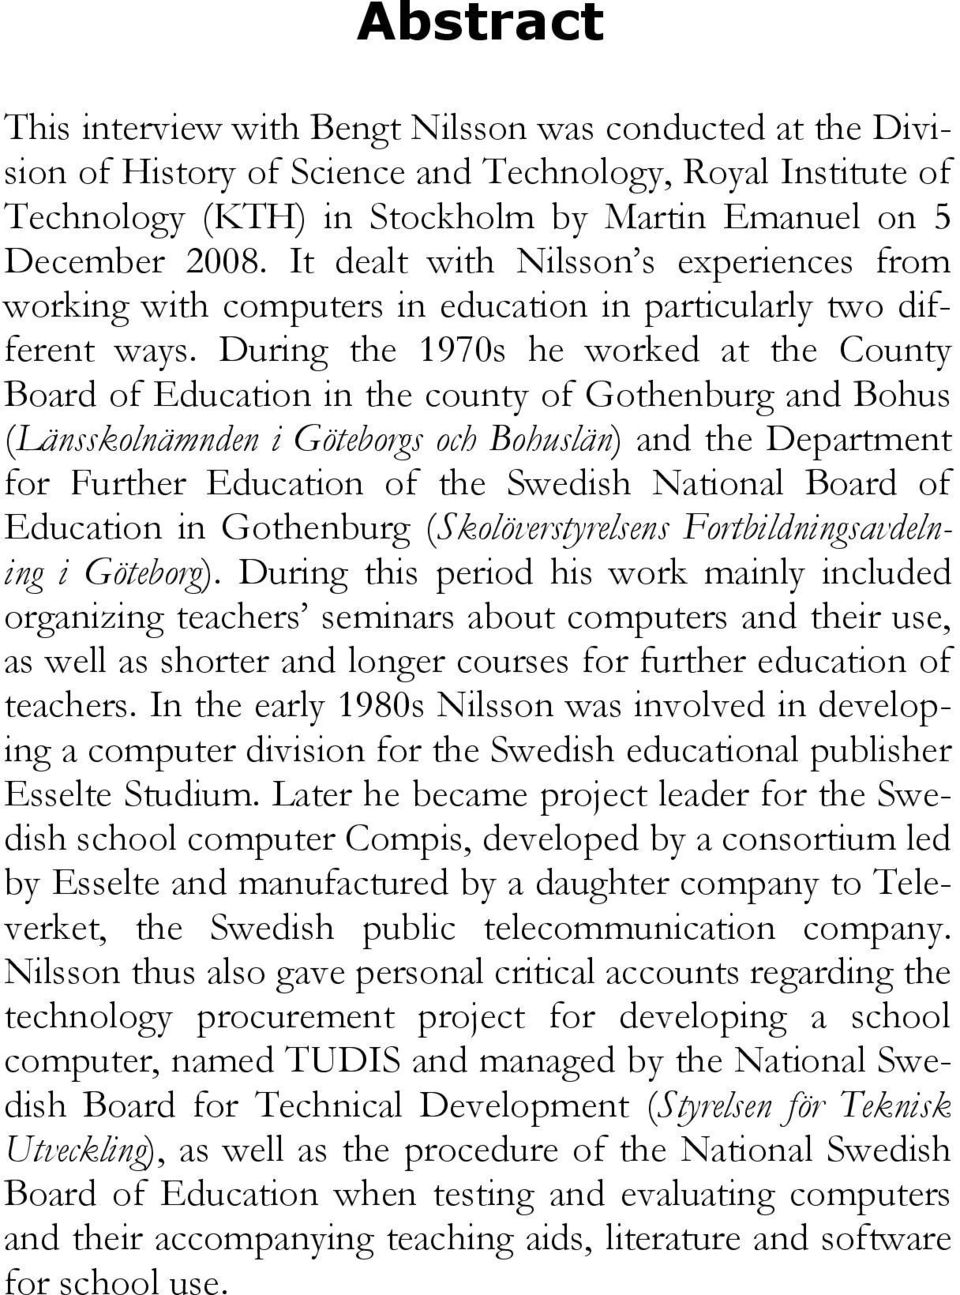 During the 1970s he worked at the County Board of Education in the county of Gothenburg and Bohus (Länsskolnämnden i Göteborgs och Bohuslän) and the Department for Further Education of the Swedish